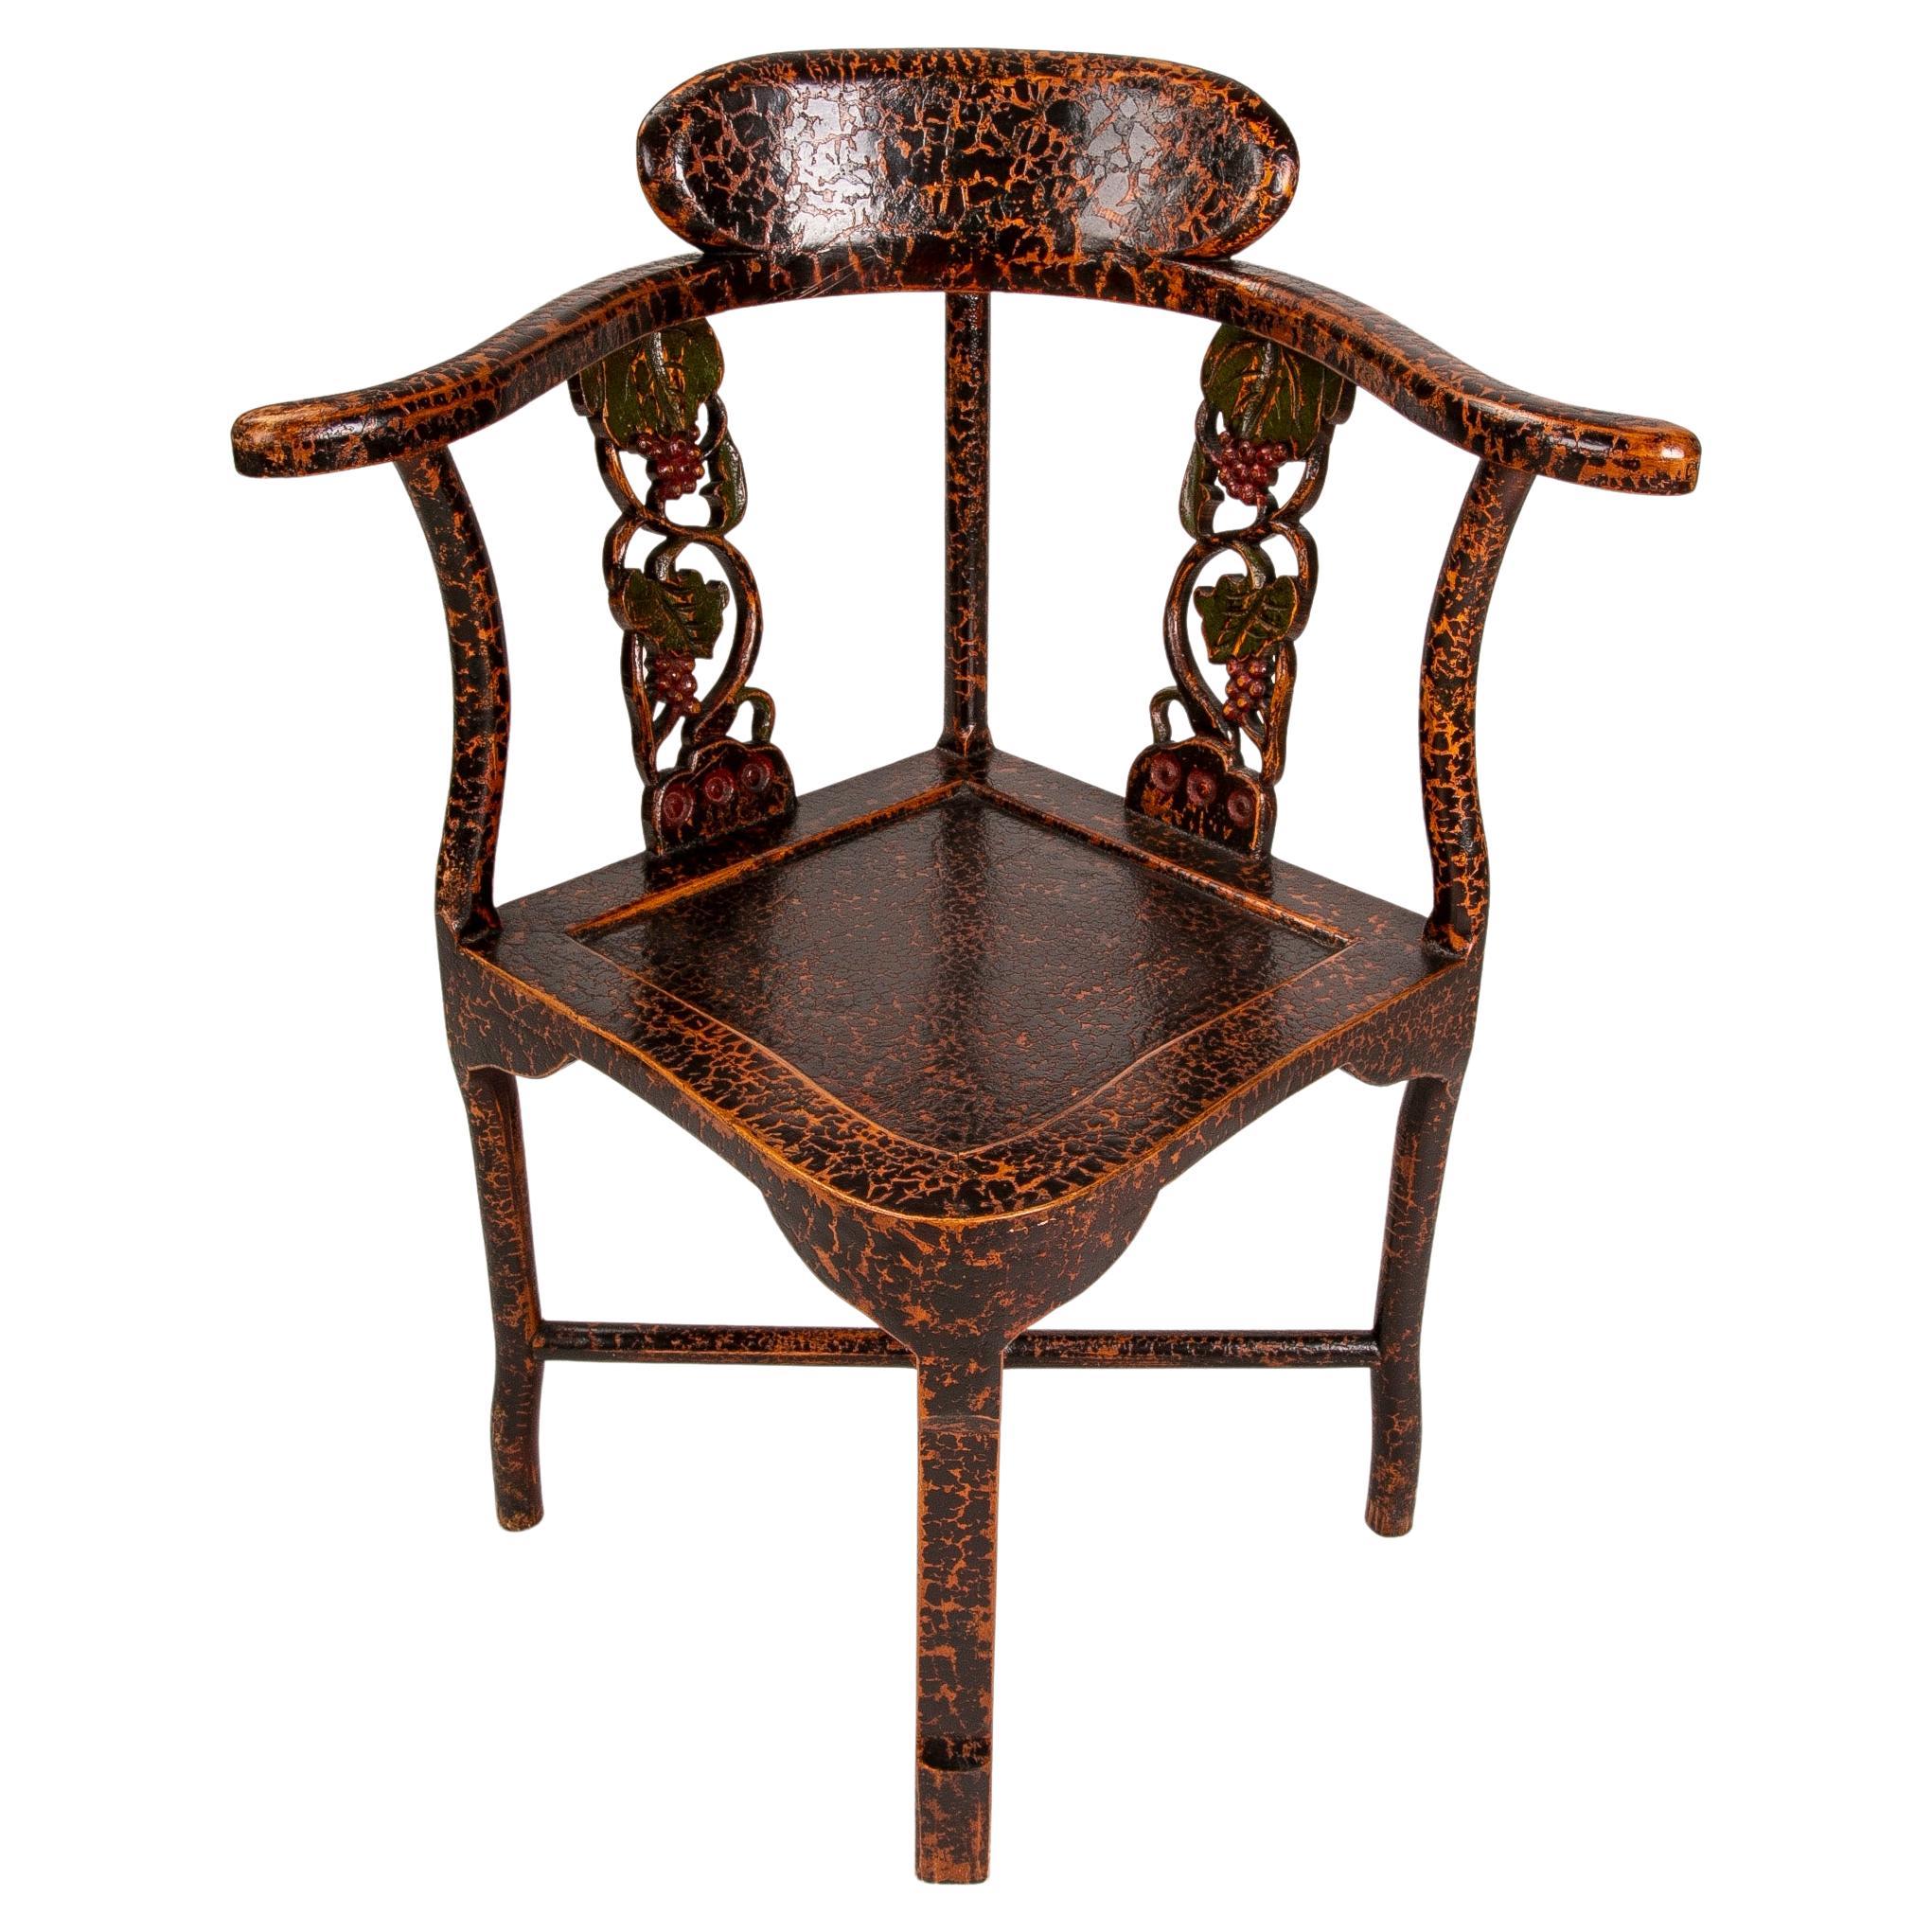 Corner Chair with Lacquered Wooden Arms and Carved Flowers on the Backrest